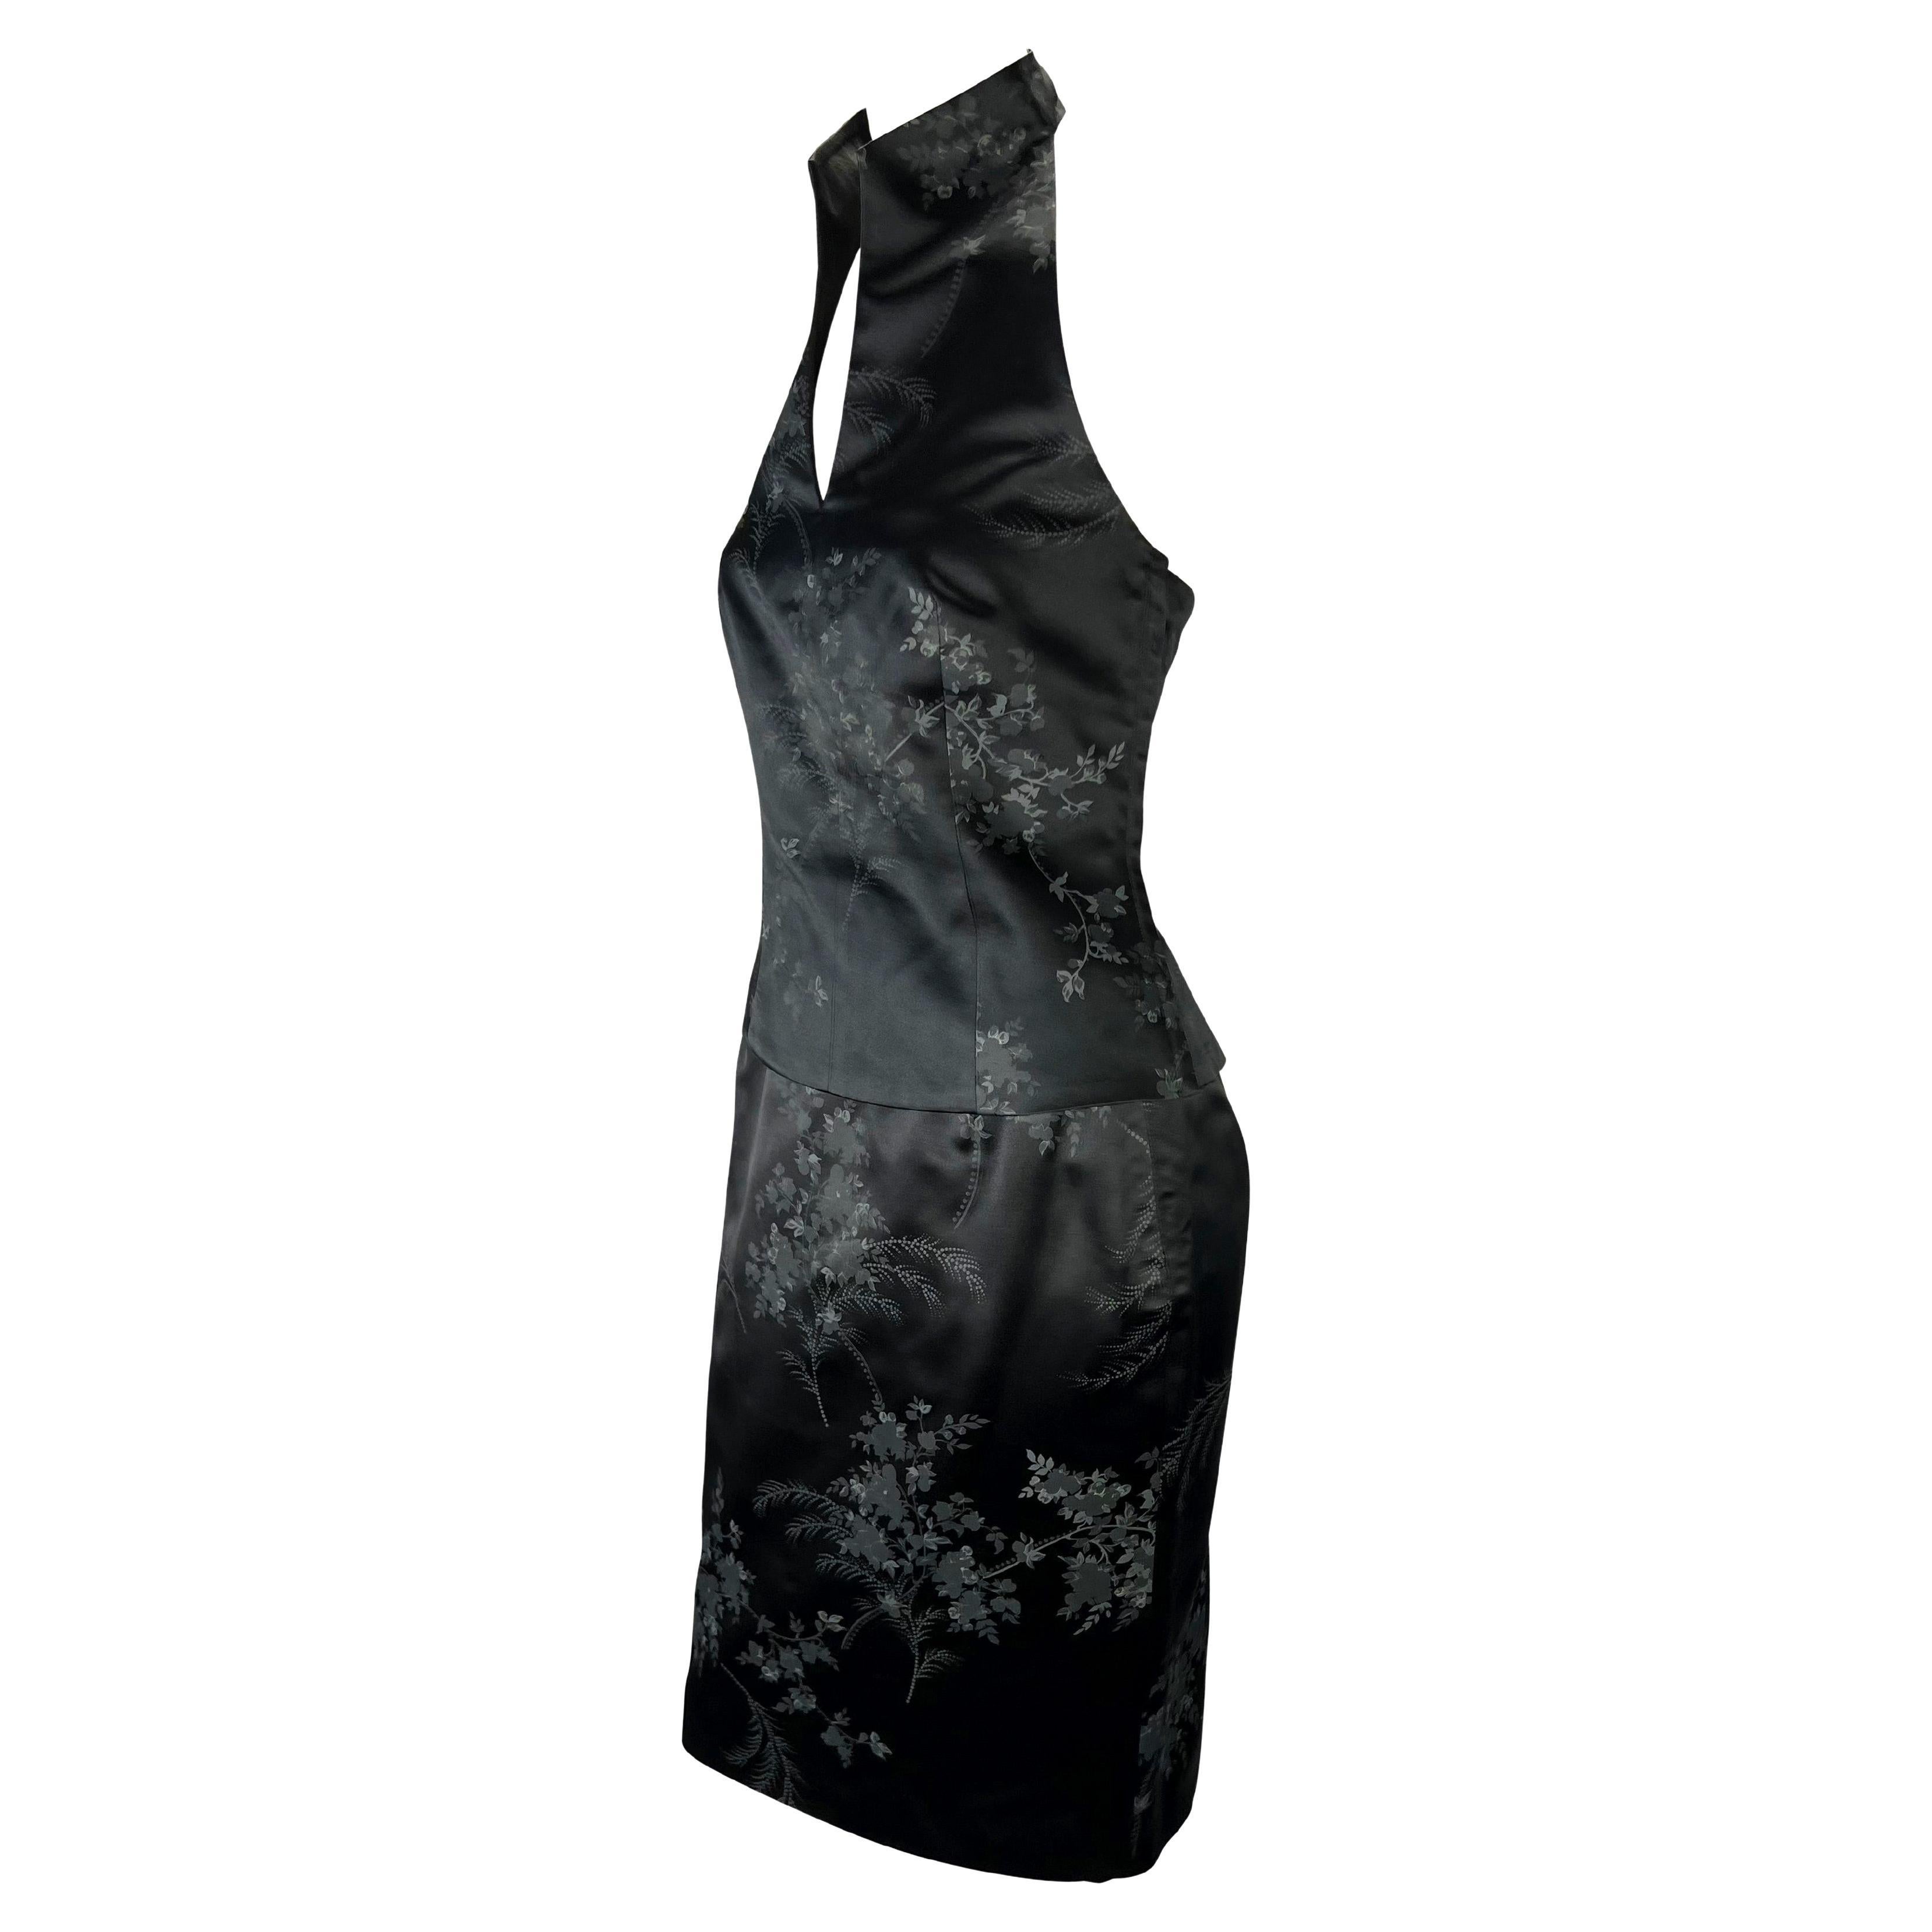 Presenting a black floral silk Gianni Versace Couture skirt set, designed by Donatella Versace. From the Spring/Summer 1998 collection, this gorgeous set is comprised of a sleeveless top and matching skirt. The sleeveless top features an exposed